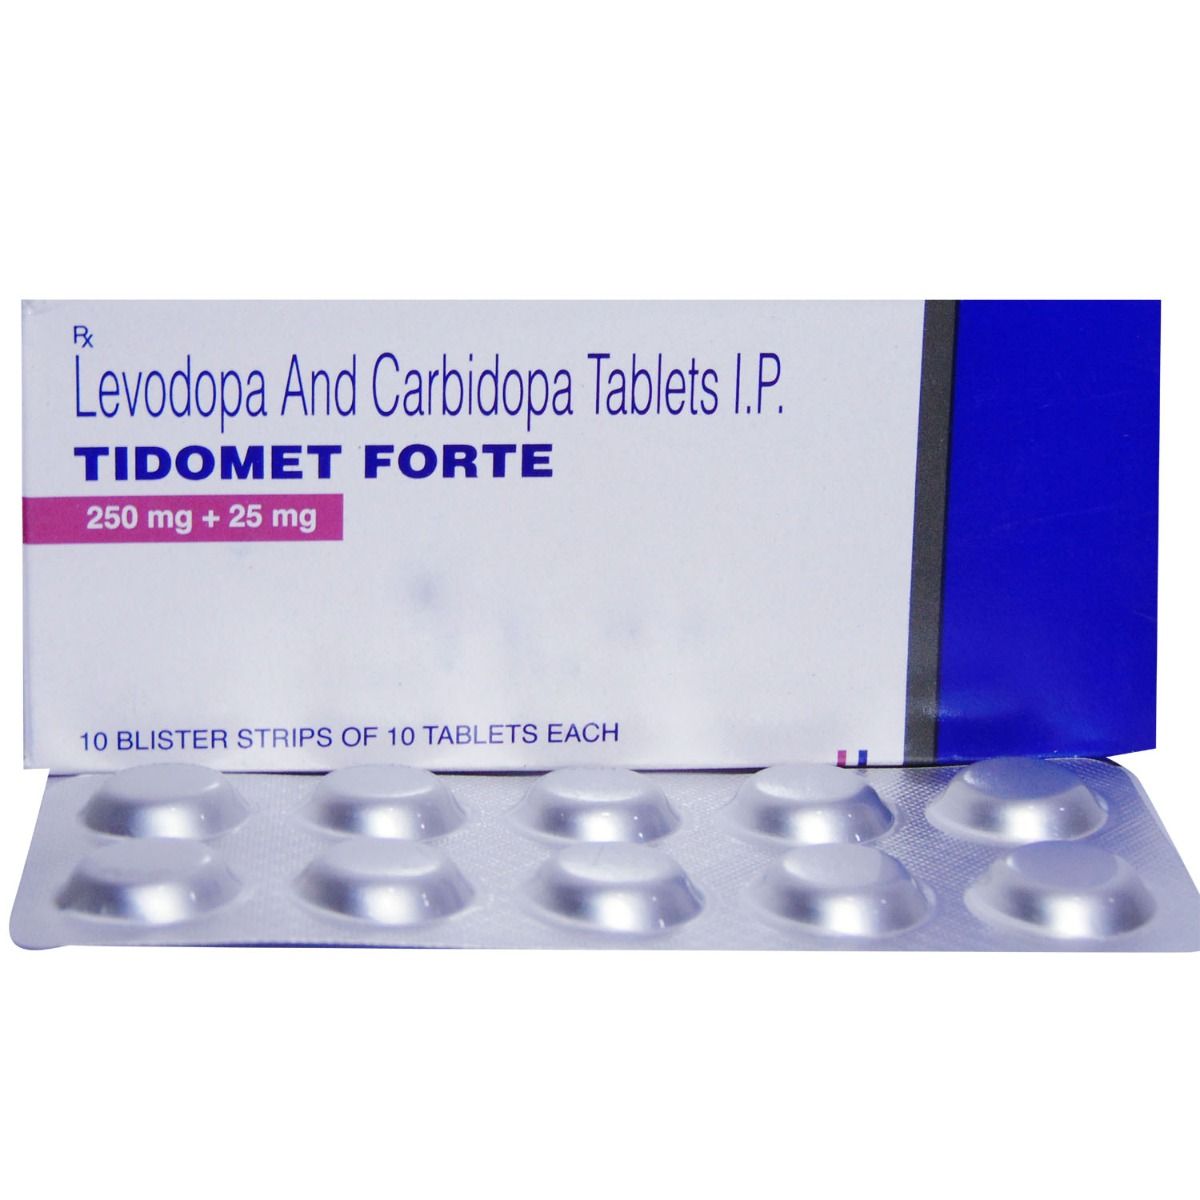 TIDOMET FORTE 25MG TABLET Price, Uses, Side Effects, Composition .